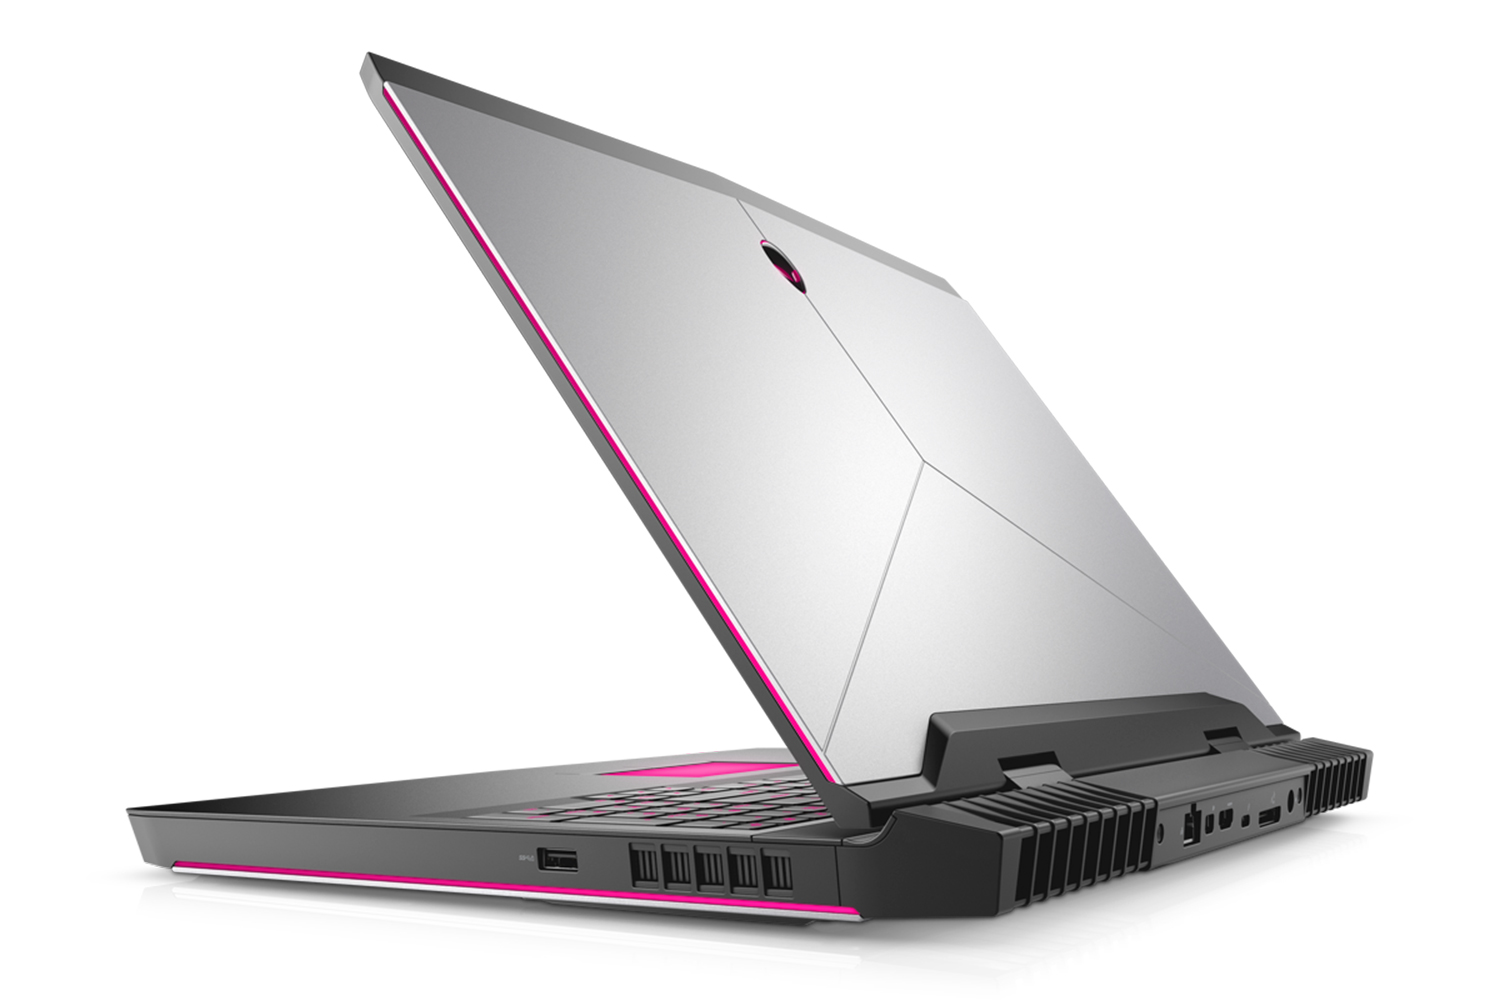 dell alienware inspiron 7000 gaming laptops refresh intel seventh gen cpu aw 17 06